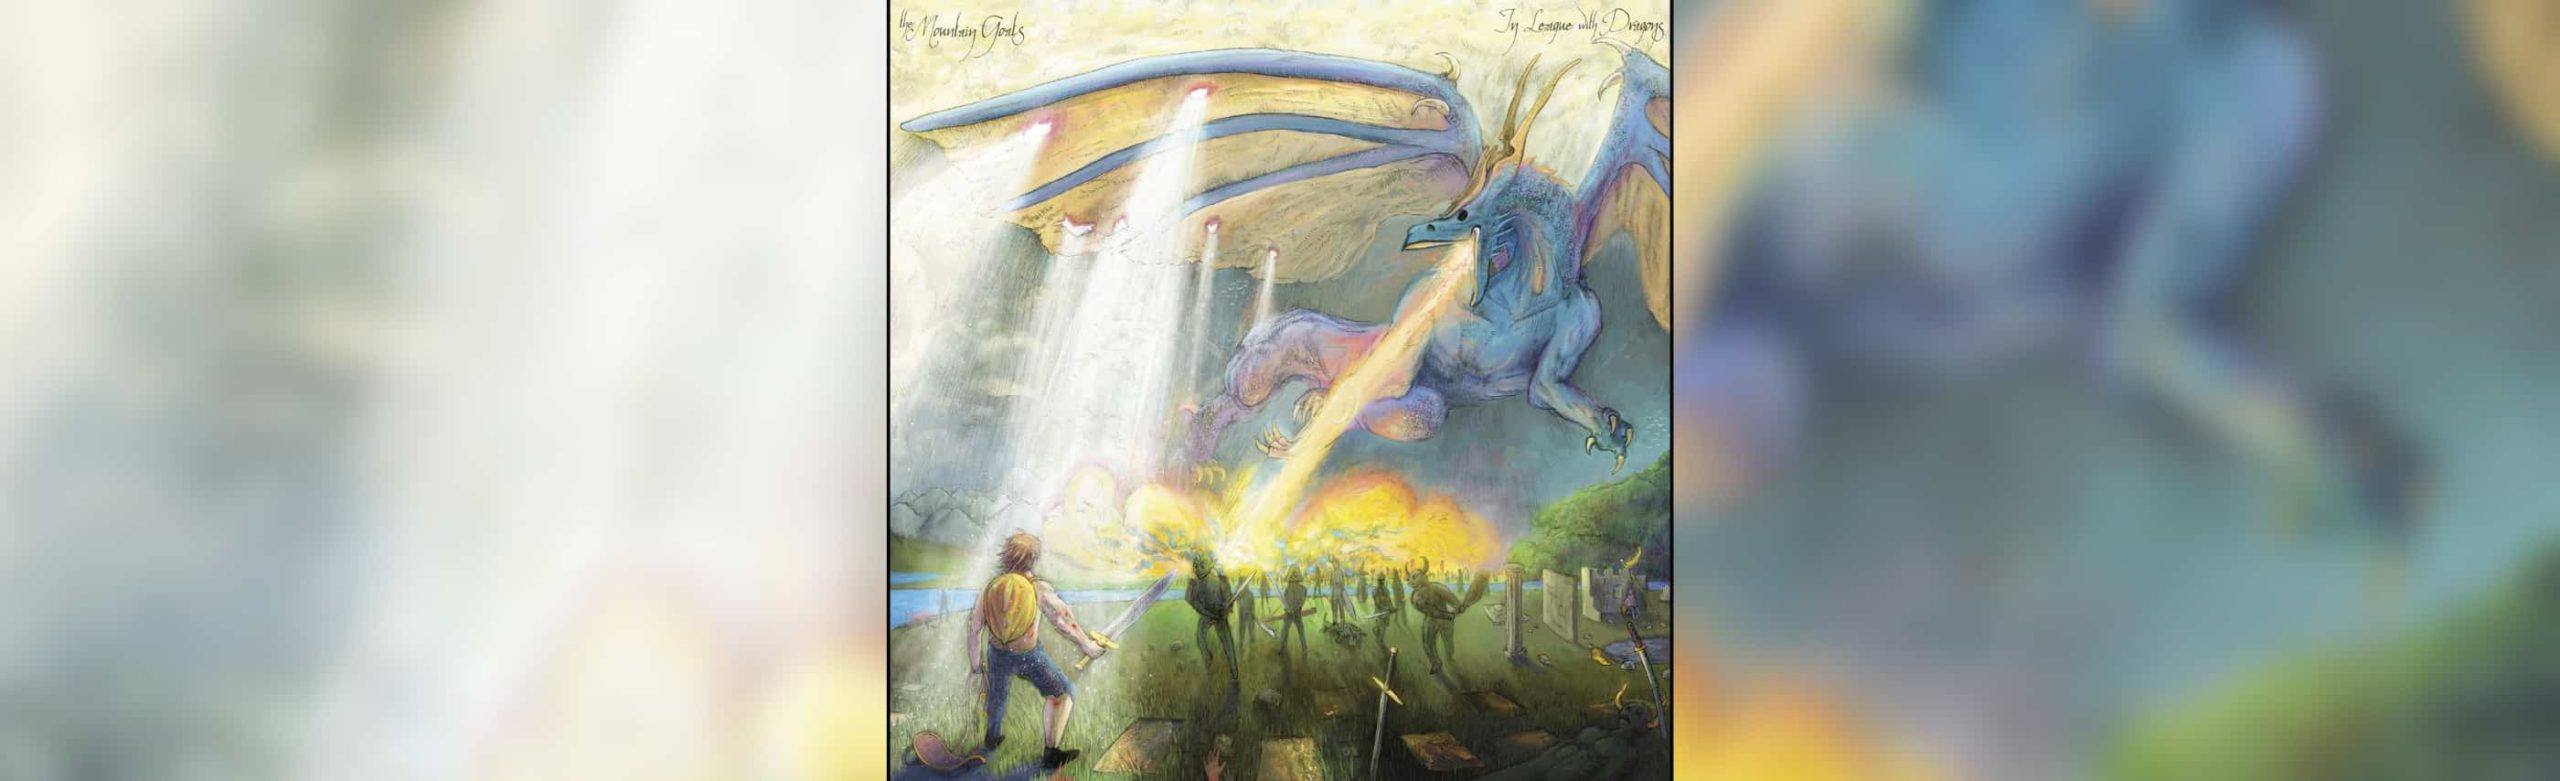 The Mountain Goats Breathe Fire on New Album “In League with Dragons” Image